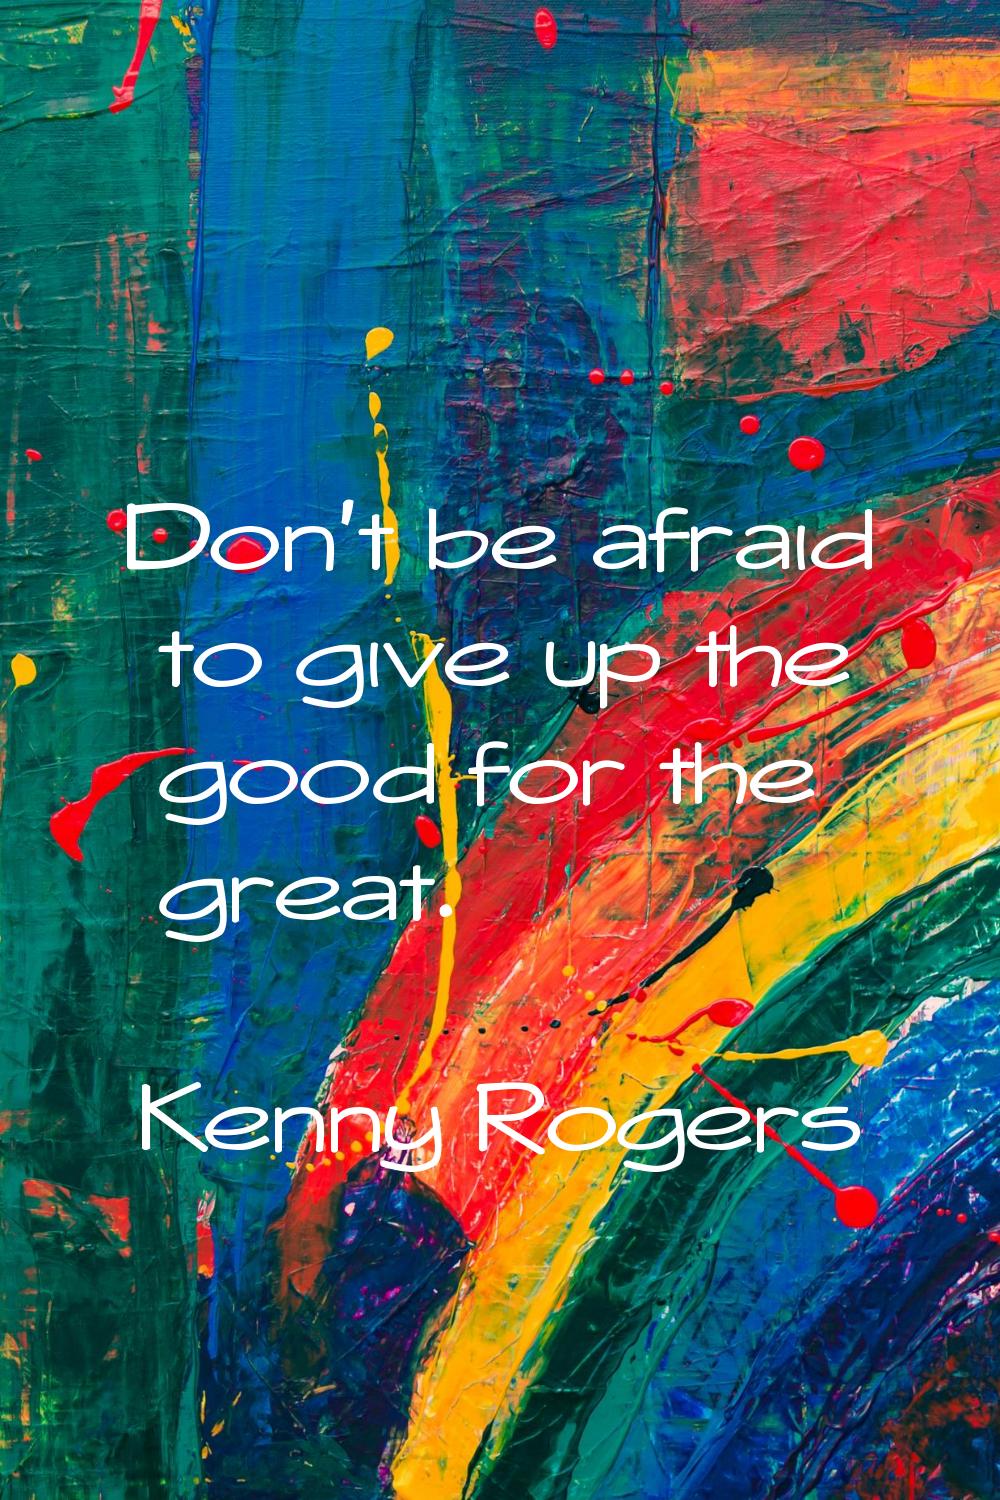 Don't be afraid to give up the good for the great.